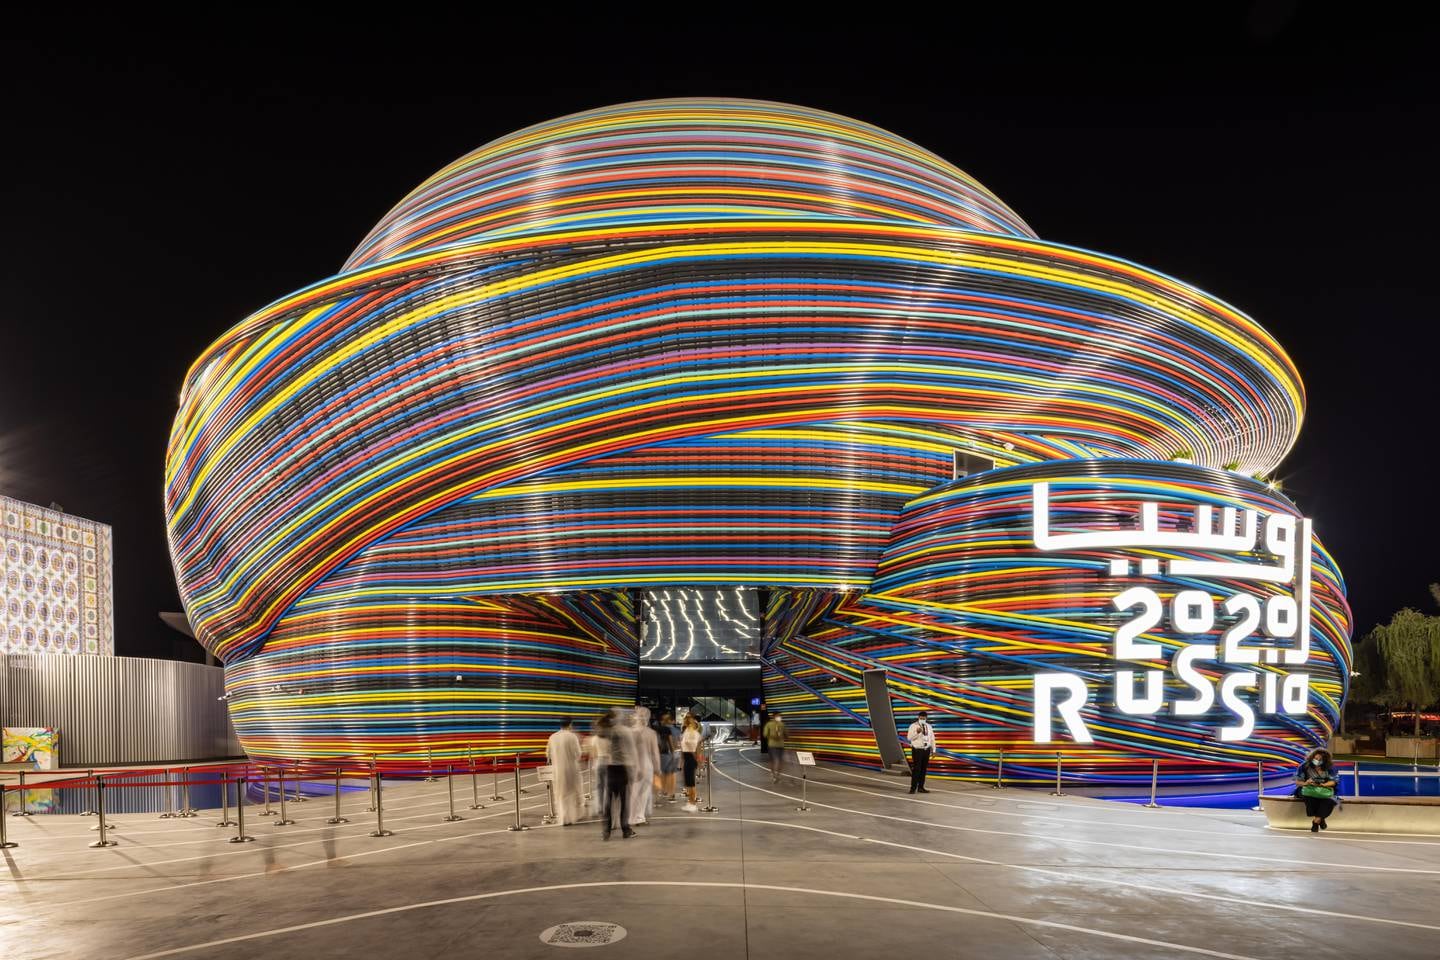 A massive sculpture of a brain is one of the main attractions of the Russia pavilion. Photo: Expo 2020 Dubai